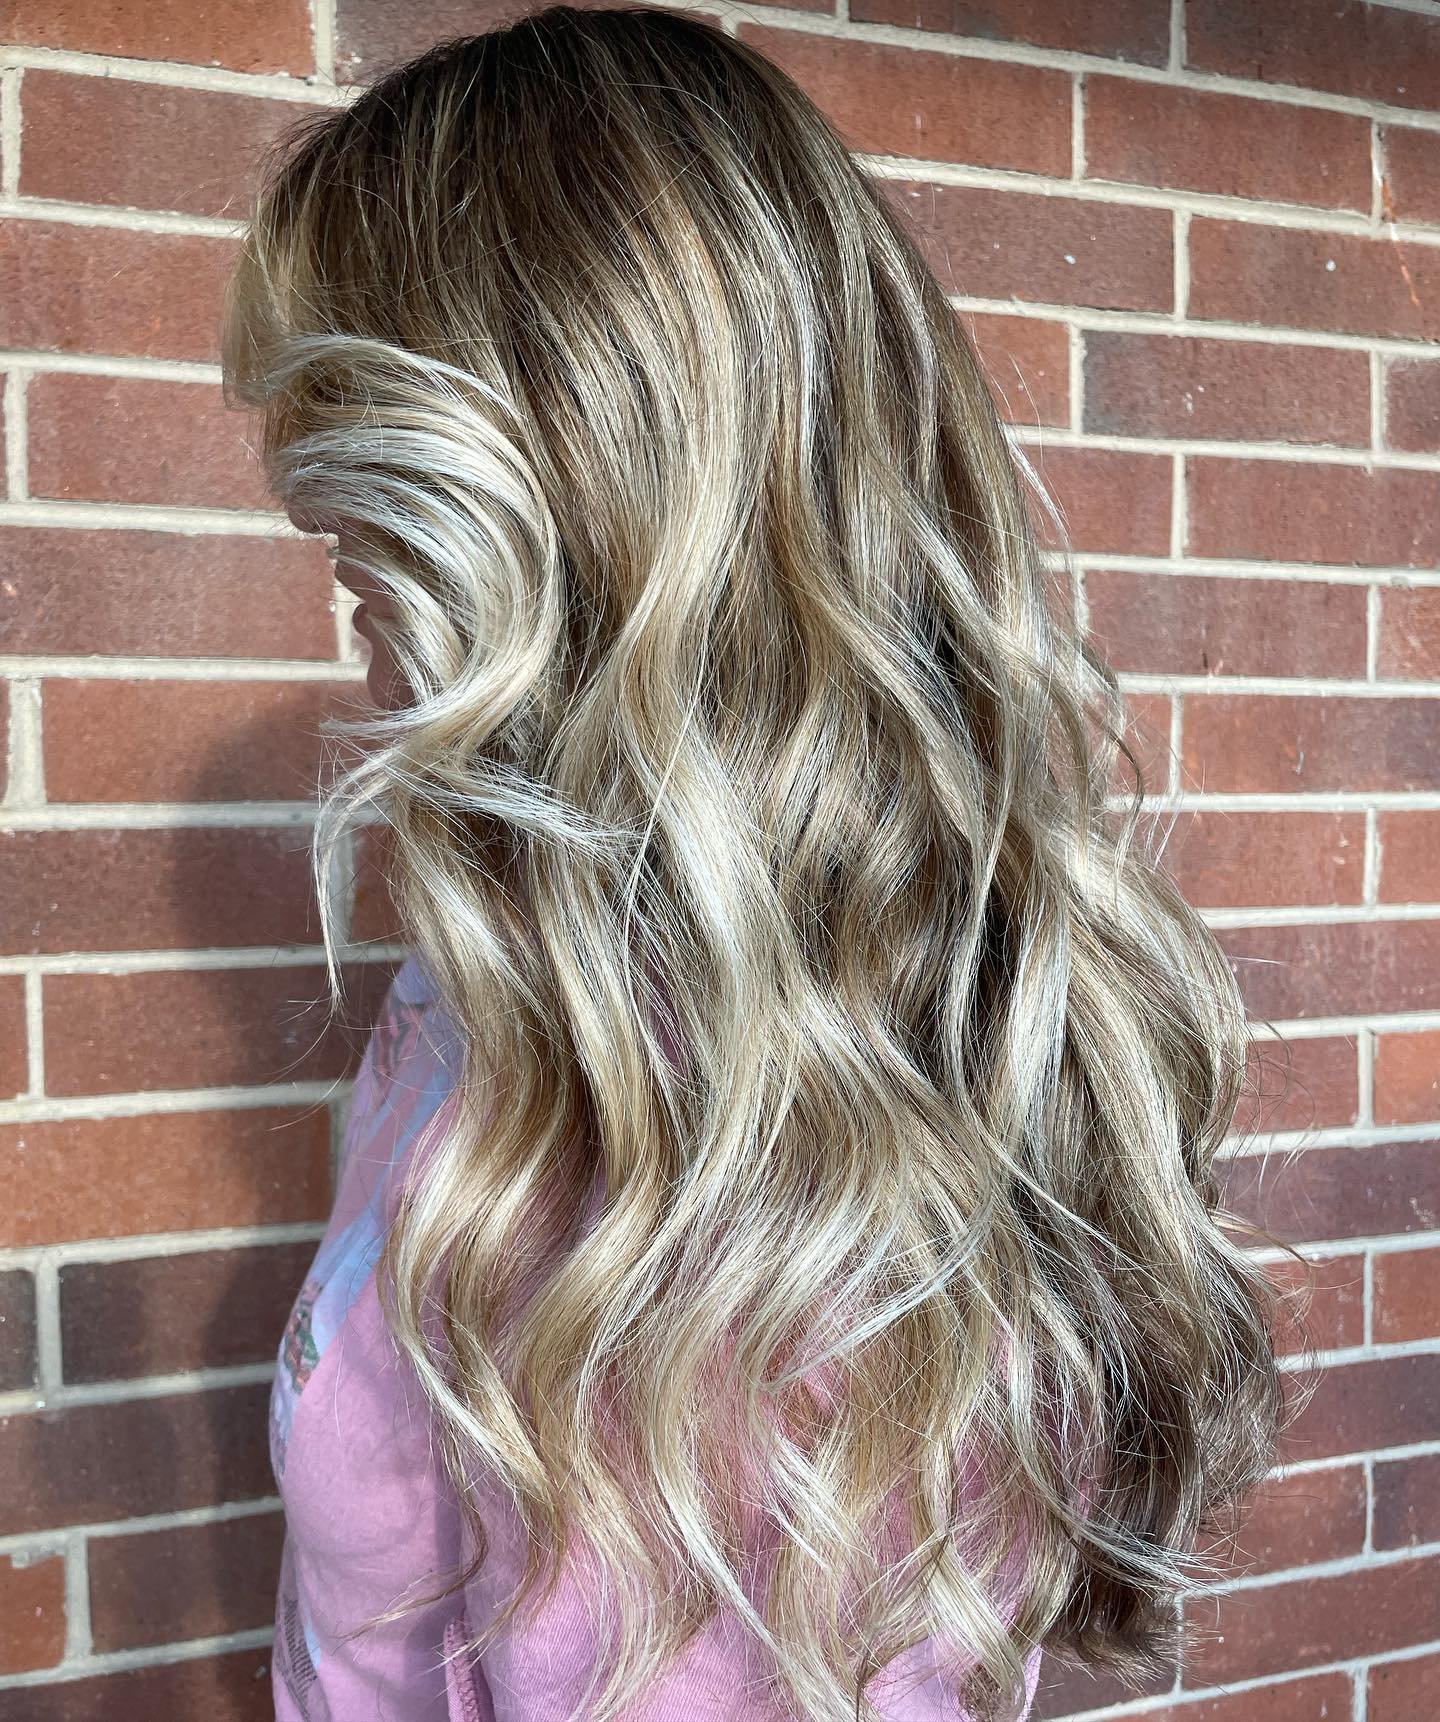 Getting my clients Spring &amp; Summer ready! ☀️🌻🌷Lisa wanted her natural root with a smooth transition into bold blonde ends. I did a ton of thick/chunky balayage and toned down the warmth in her hair while bringing some cooler tones to the forefr